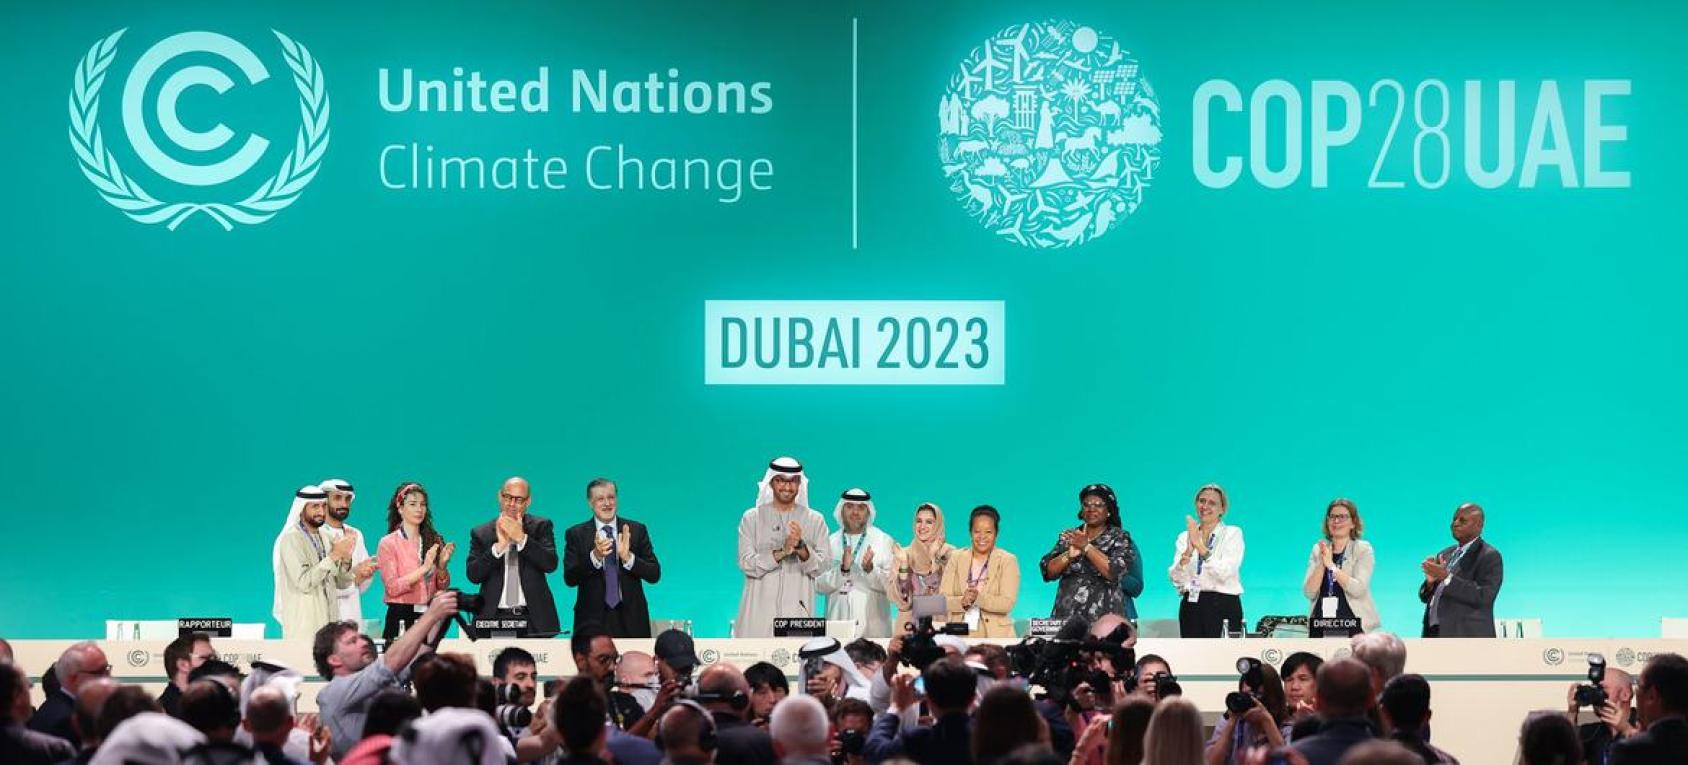 A group of 11 people stand on a podium with a green back-ground signifying the UN Climate Change Conference COP28 in Dubai.